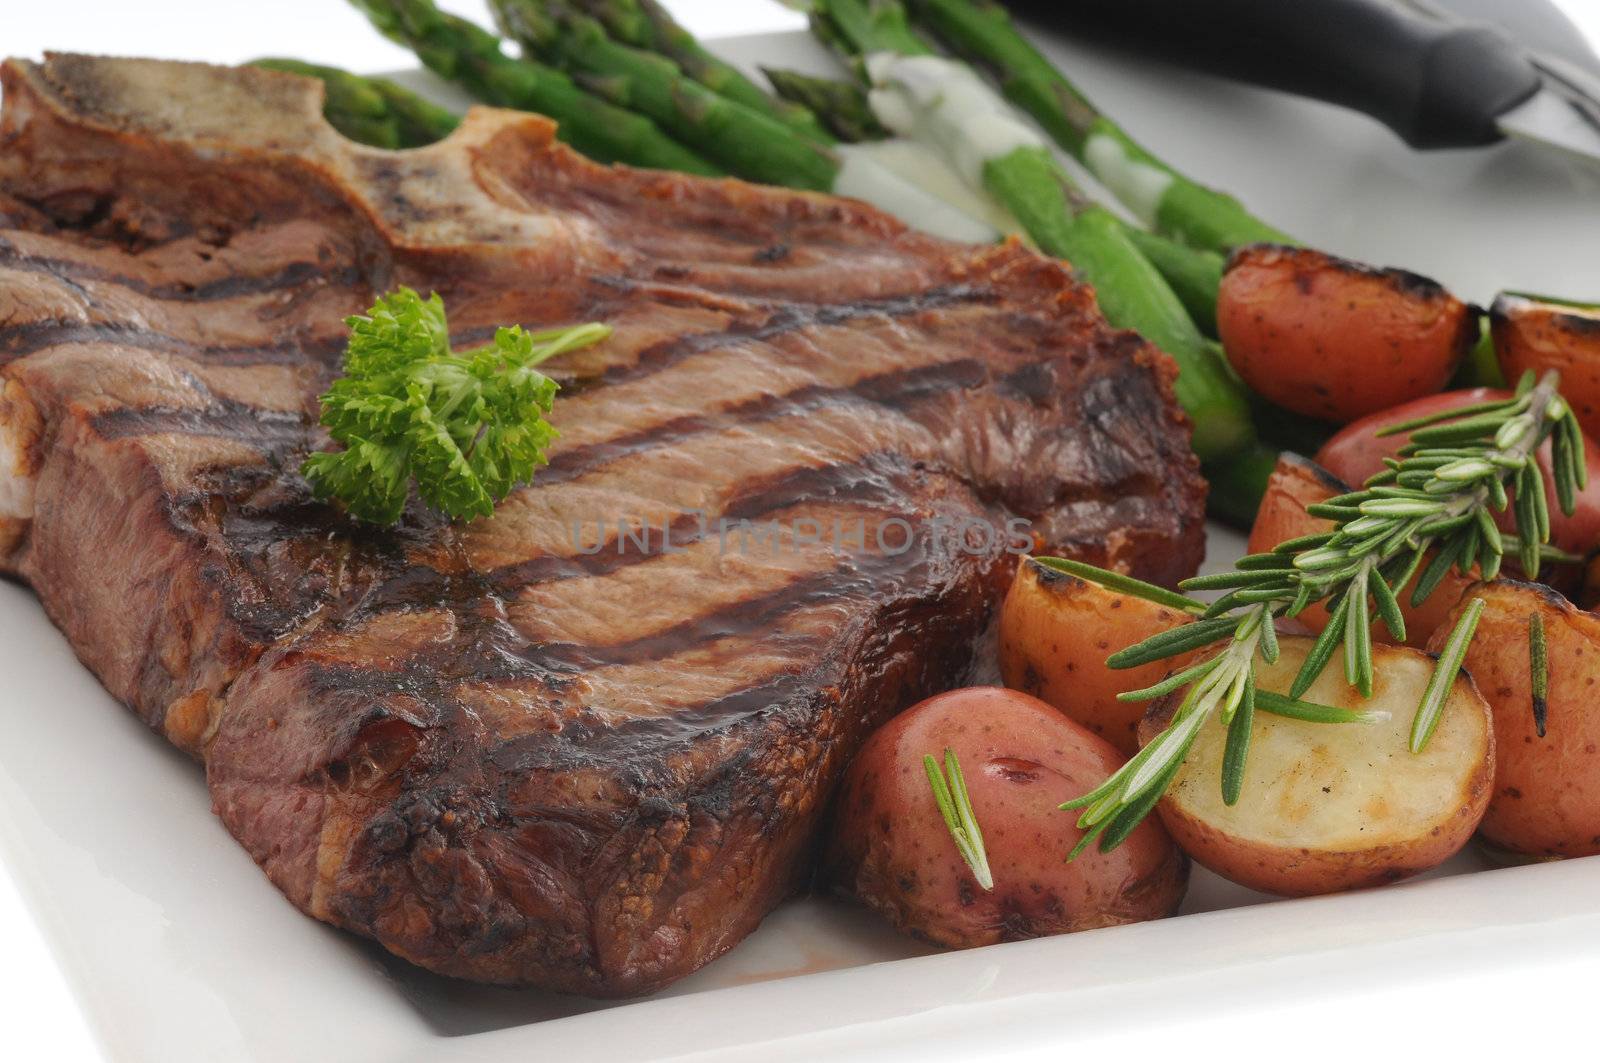 Perfectly grilled t-bone steak with roasted vegetables.